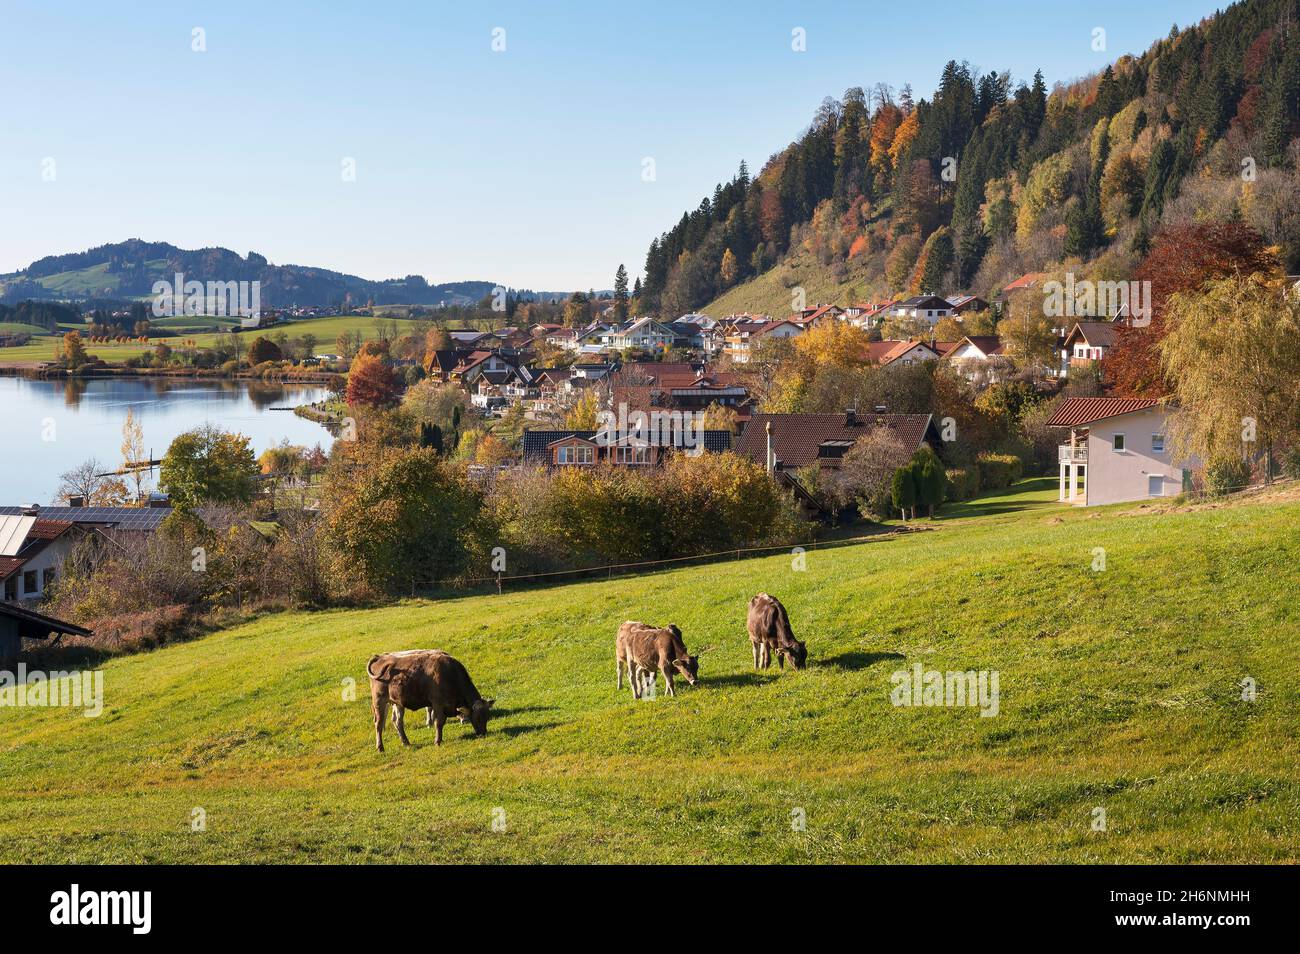 Autumn atmosphere at Hopfensee, Hopfen am See is a Kneipp and climatic health resort, Allgaeu, Bavaria, Germany Stock Photo